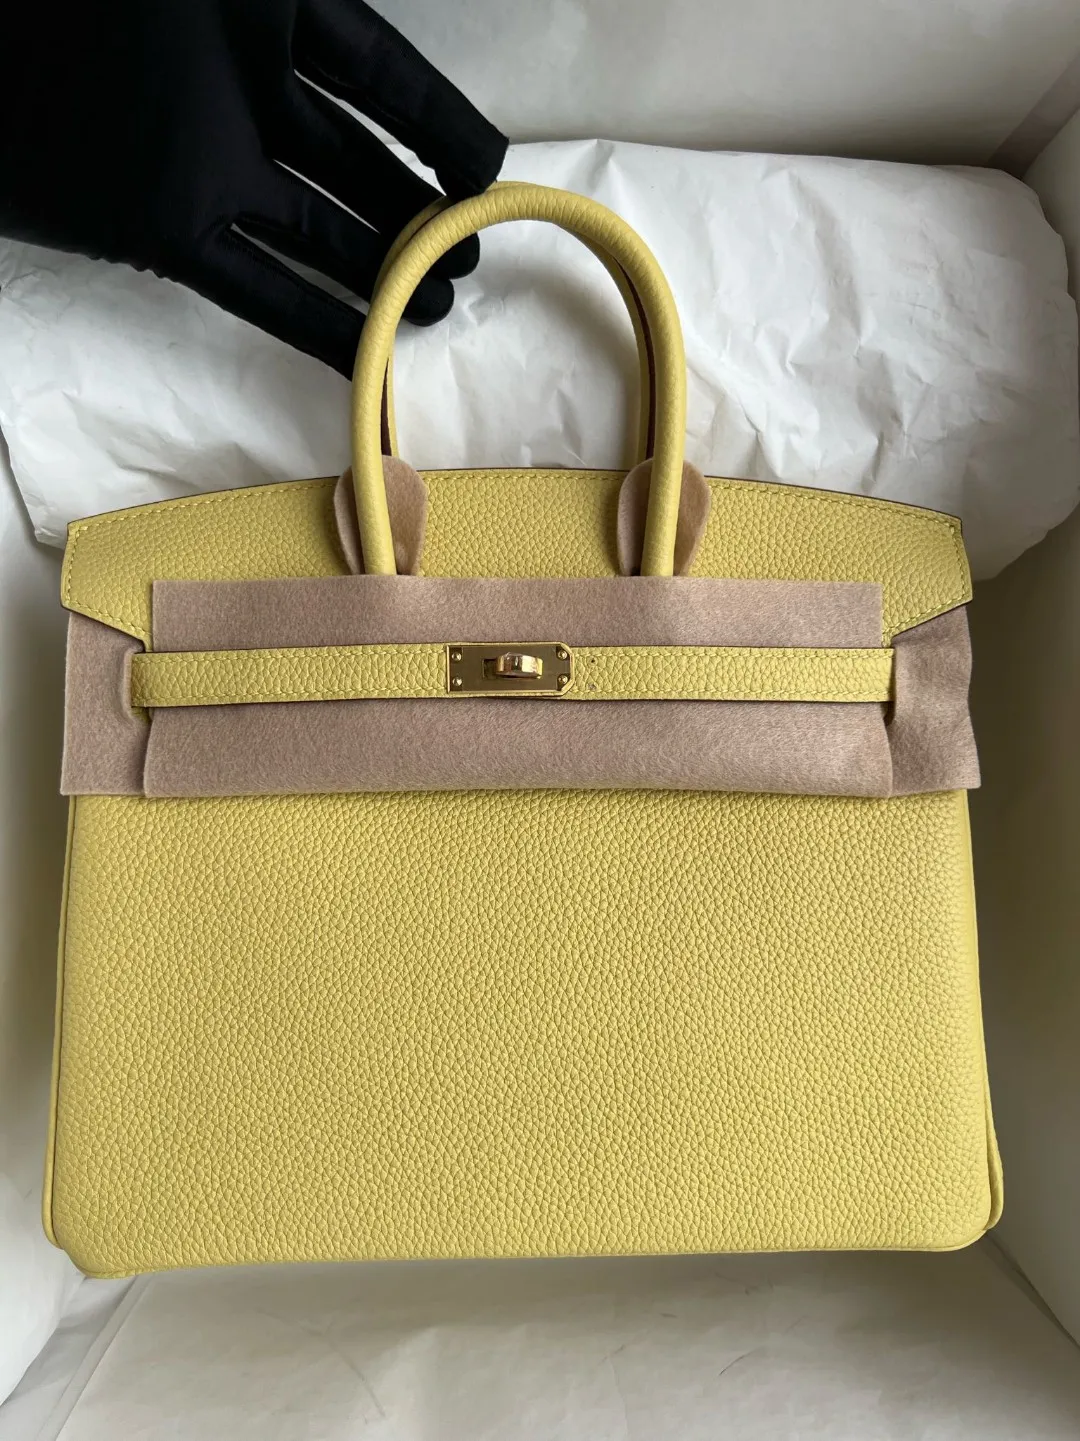 Designer Green Tote Bag Green For Women Lightweight Leather Handbag With  High Quality Material, Perfect Gift For Luxury Style From Factory From  Luckybag7799, $53.89 | DHgate.Com